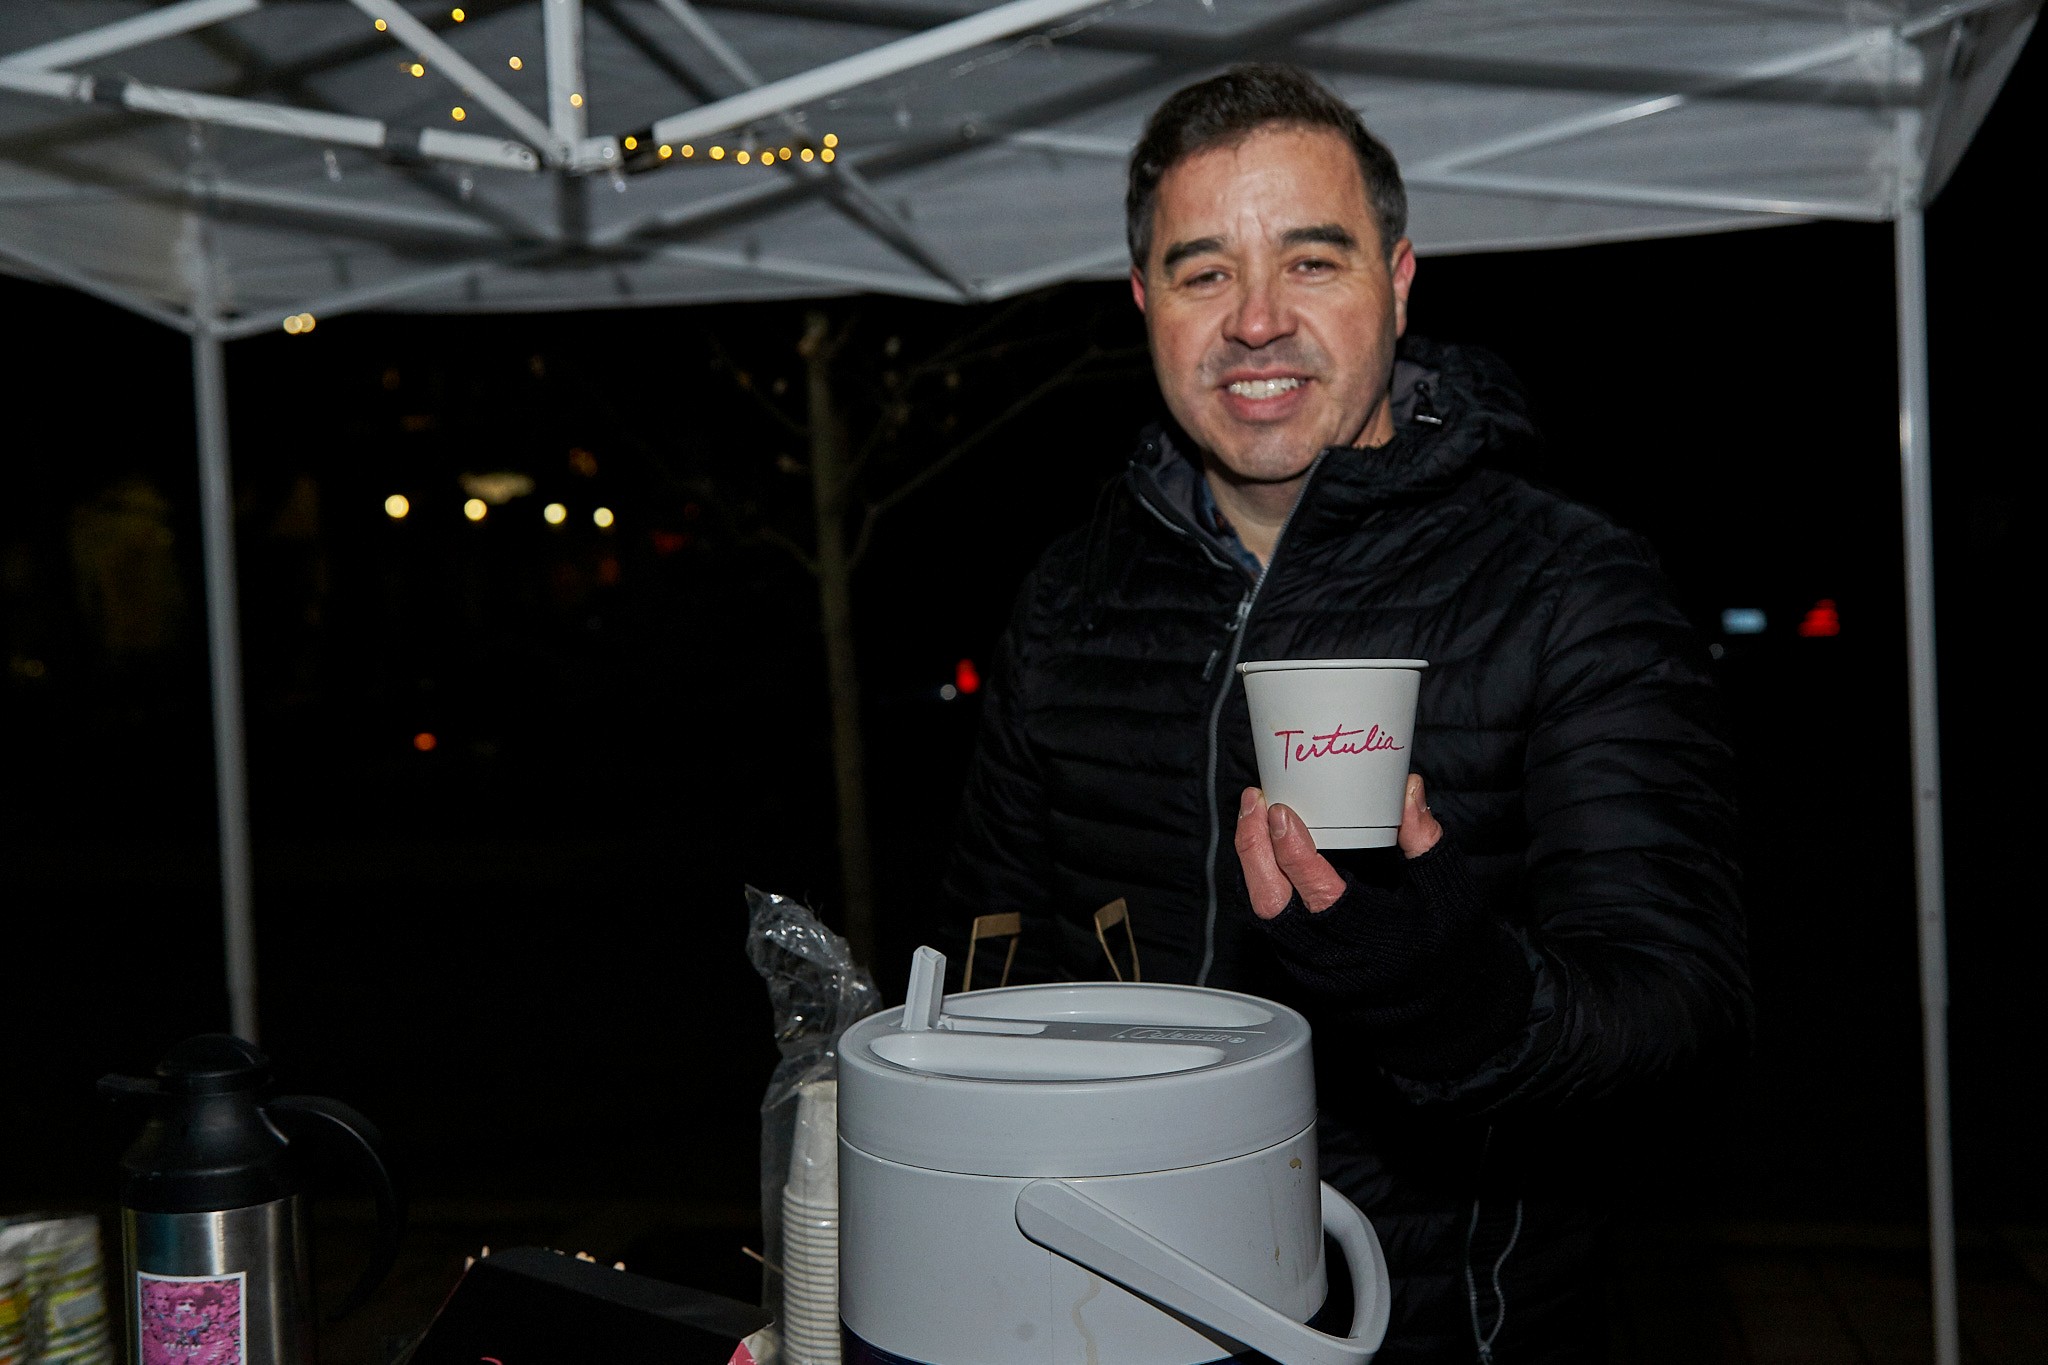 George from Tertulia serving up cognacr-infused coffee, Light Up Riverside, Toronto 2019